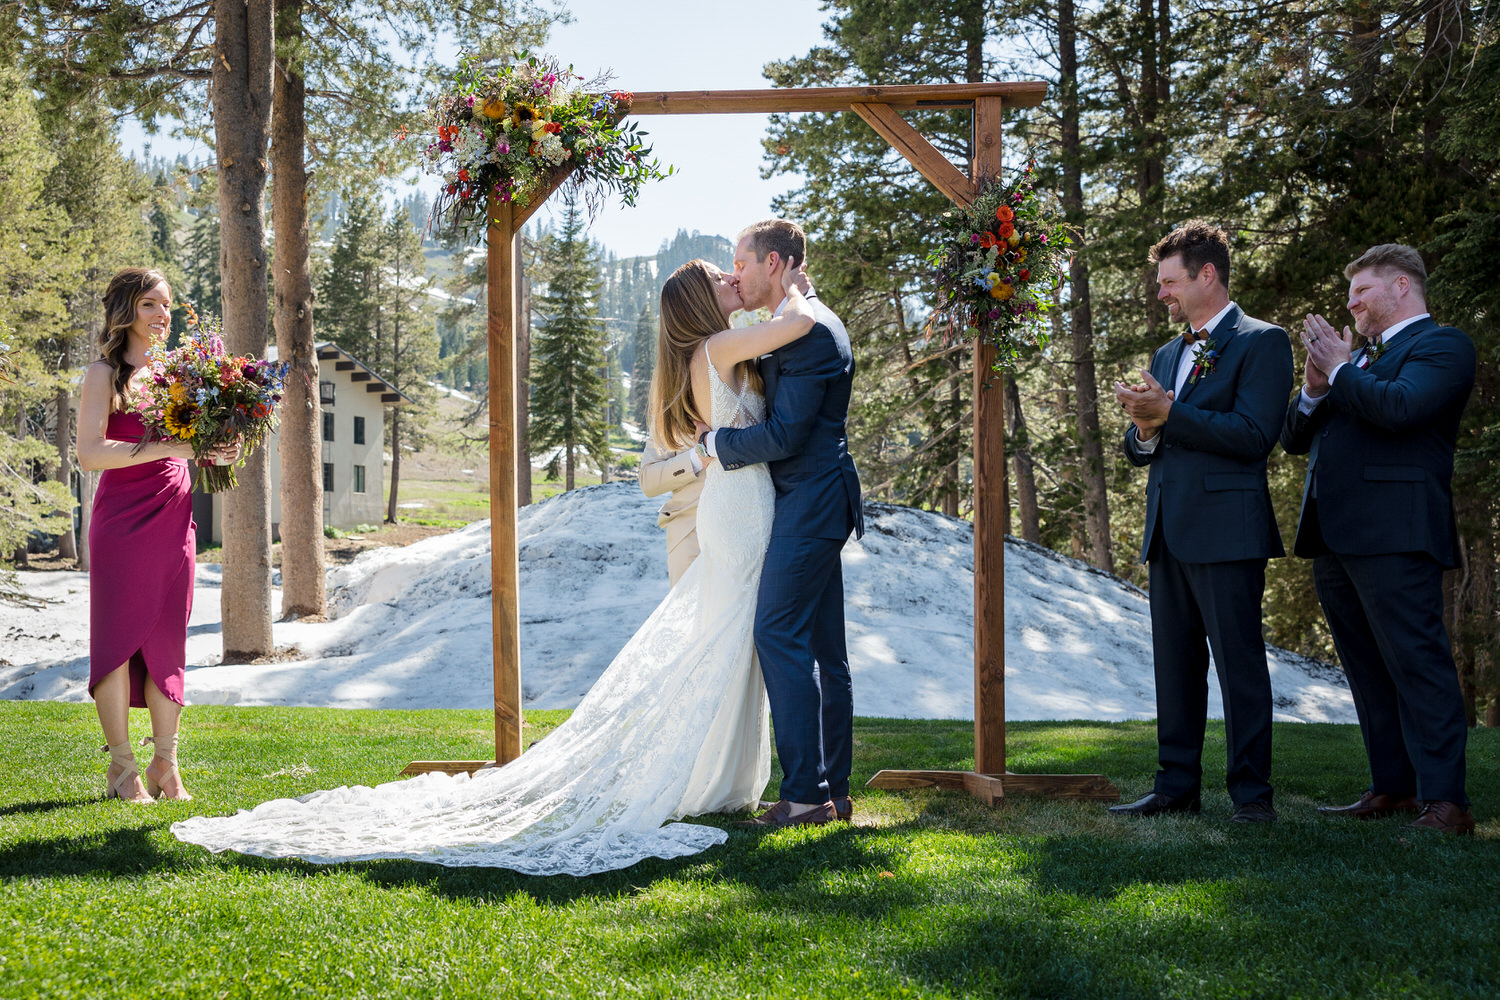 A celebratory first kiss for the bride and groom at a Sugar Bowl Resort ceremony on the lawn.